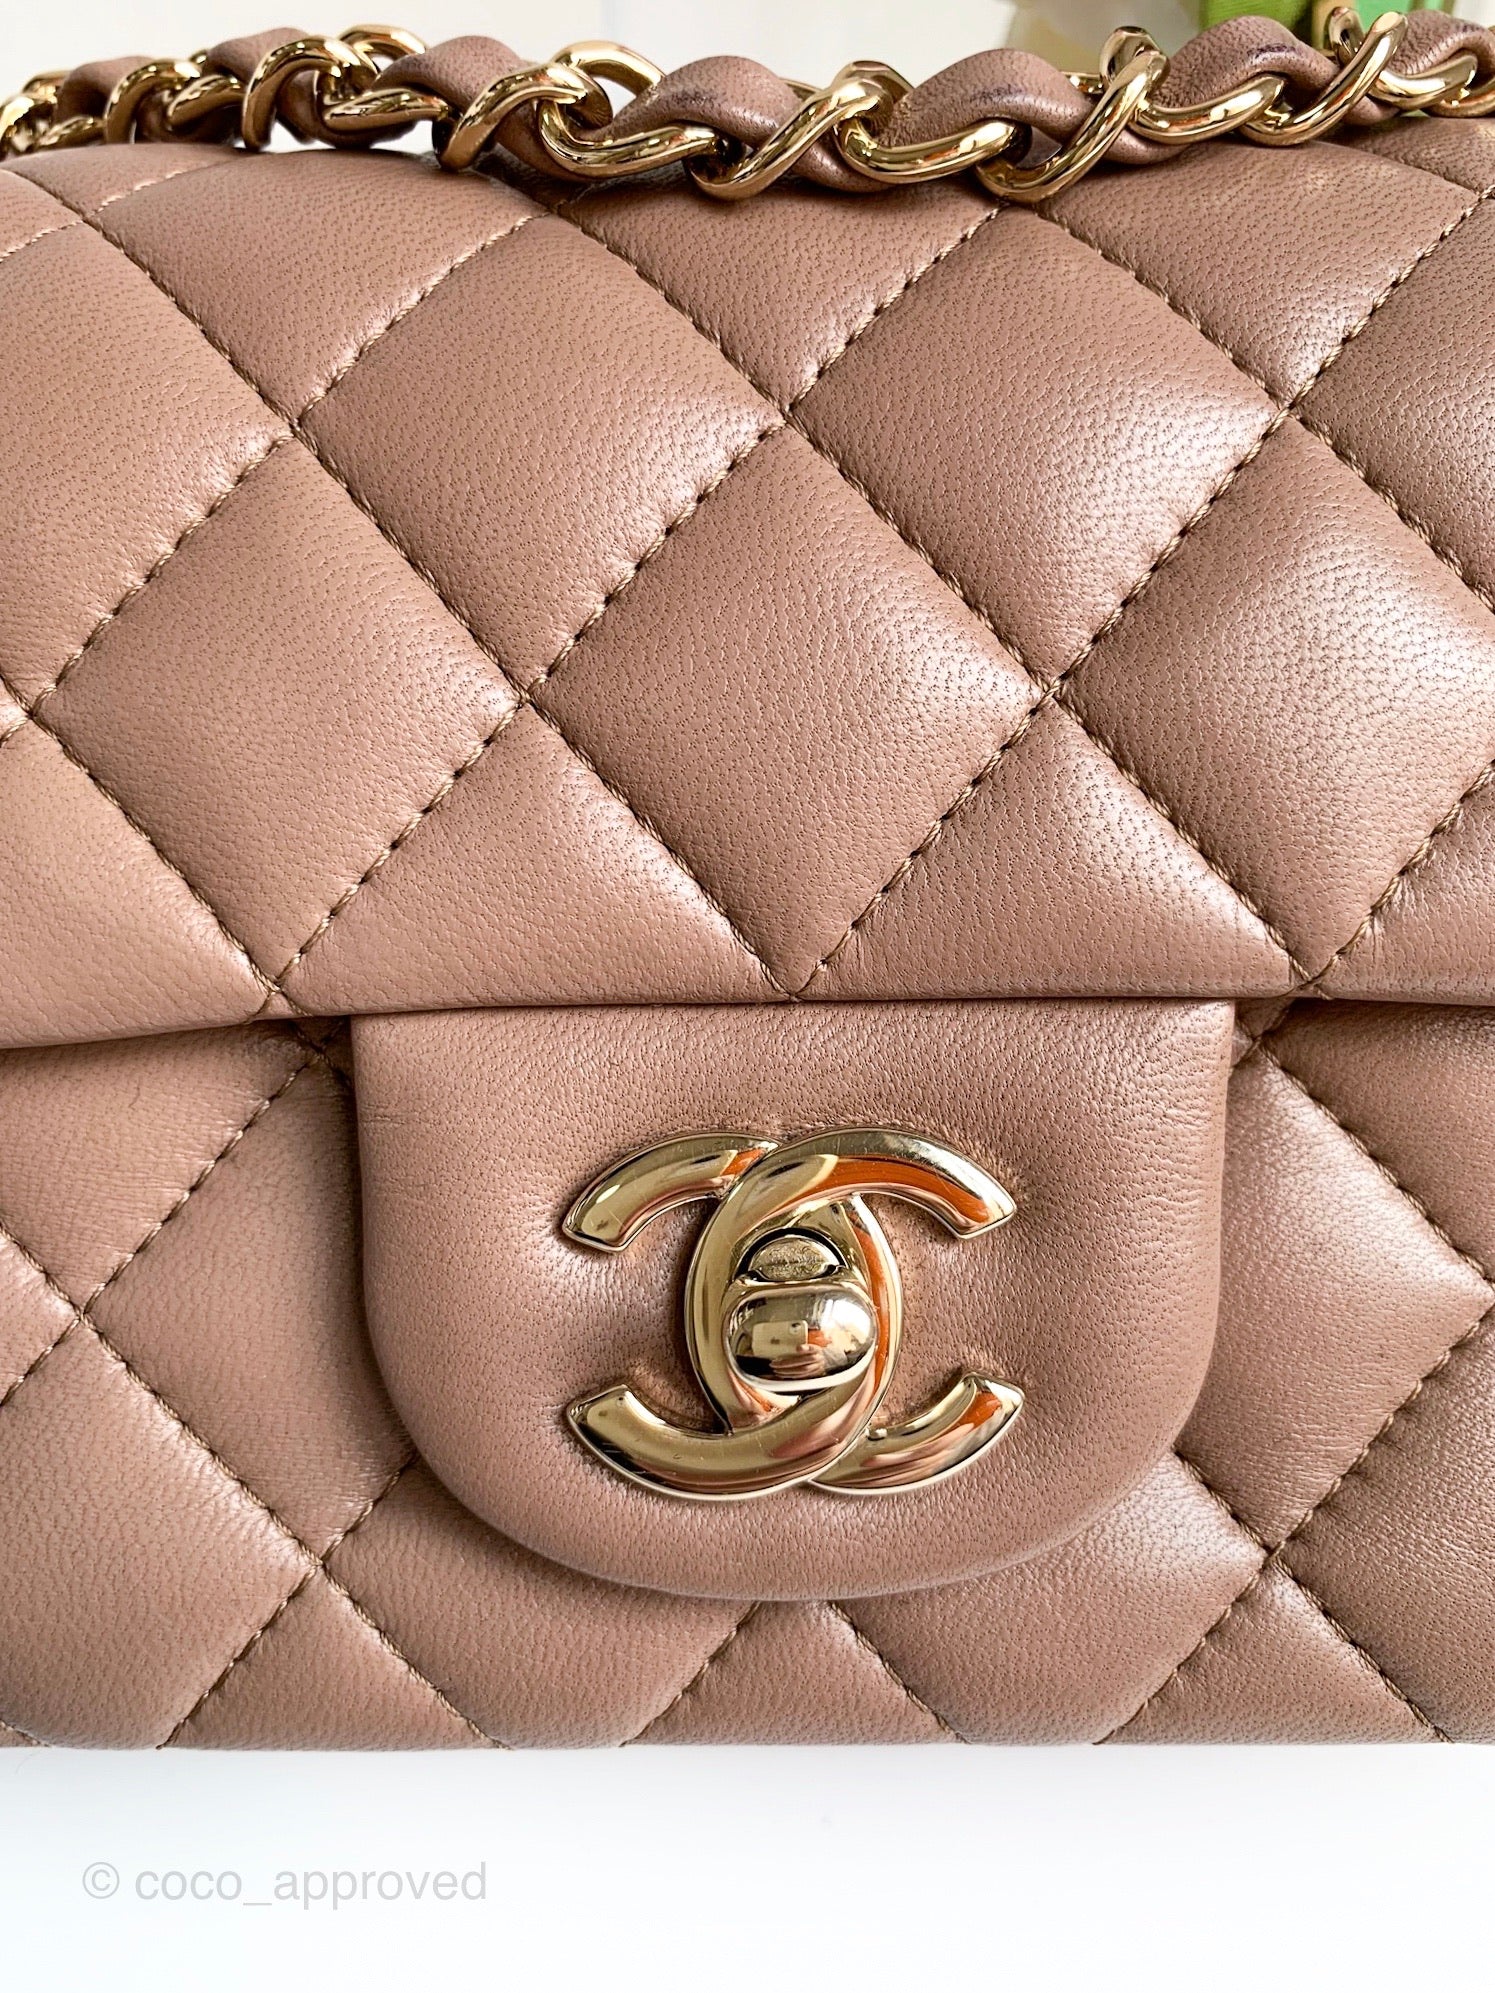 Chanel Mini Dark Brown Quilted Lambskin Classic